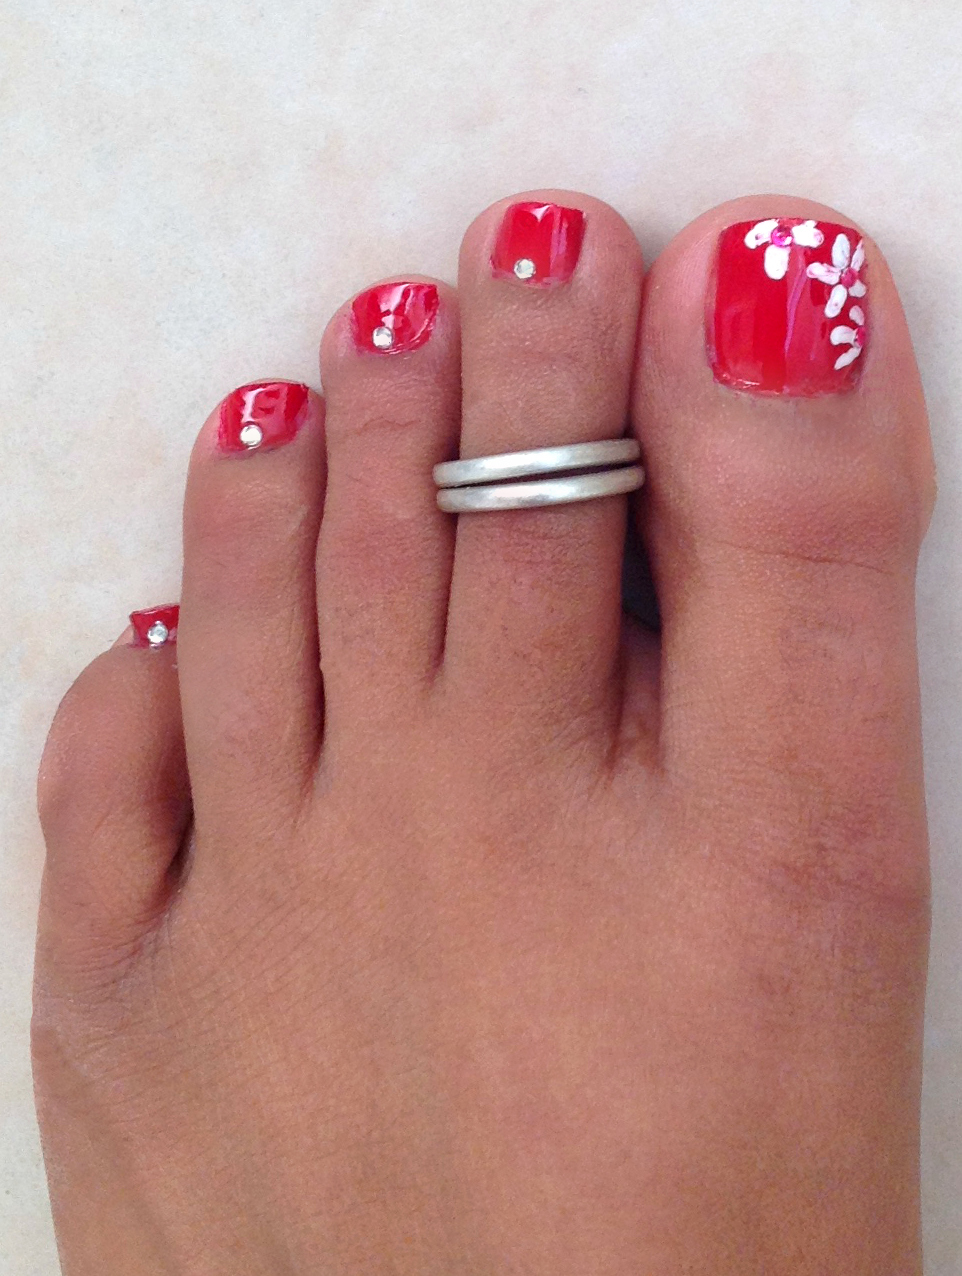 My Beauty Journal: Cute and Simple Pedicure Design